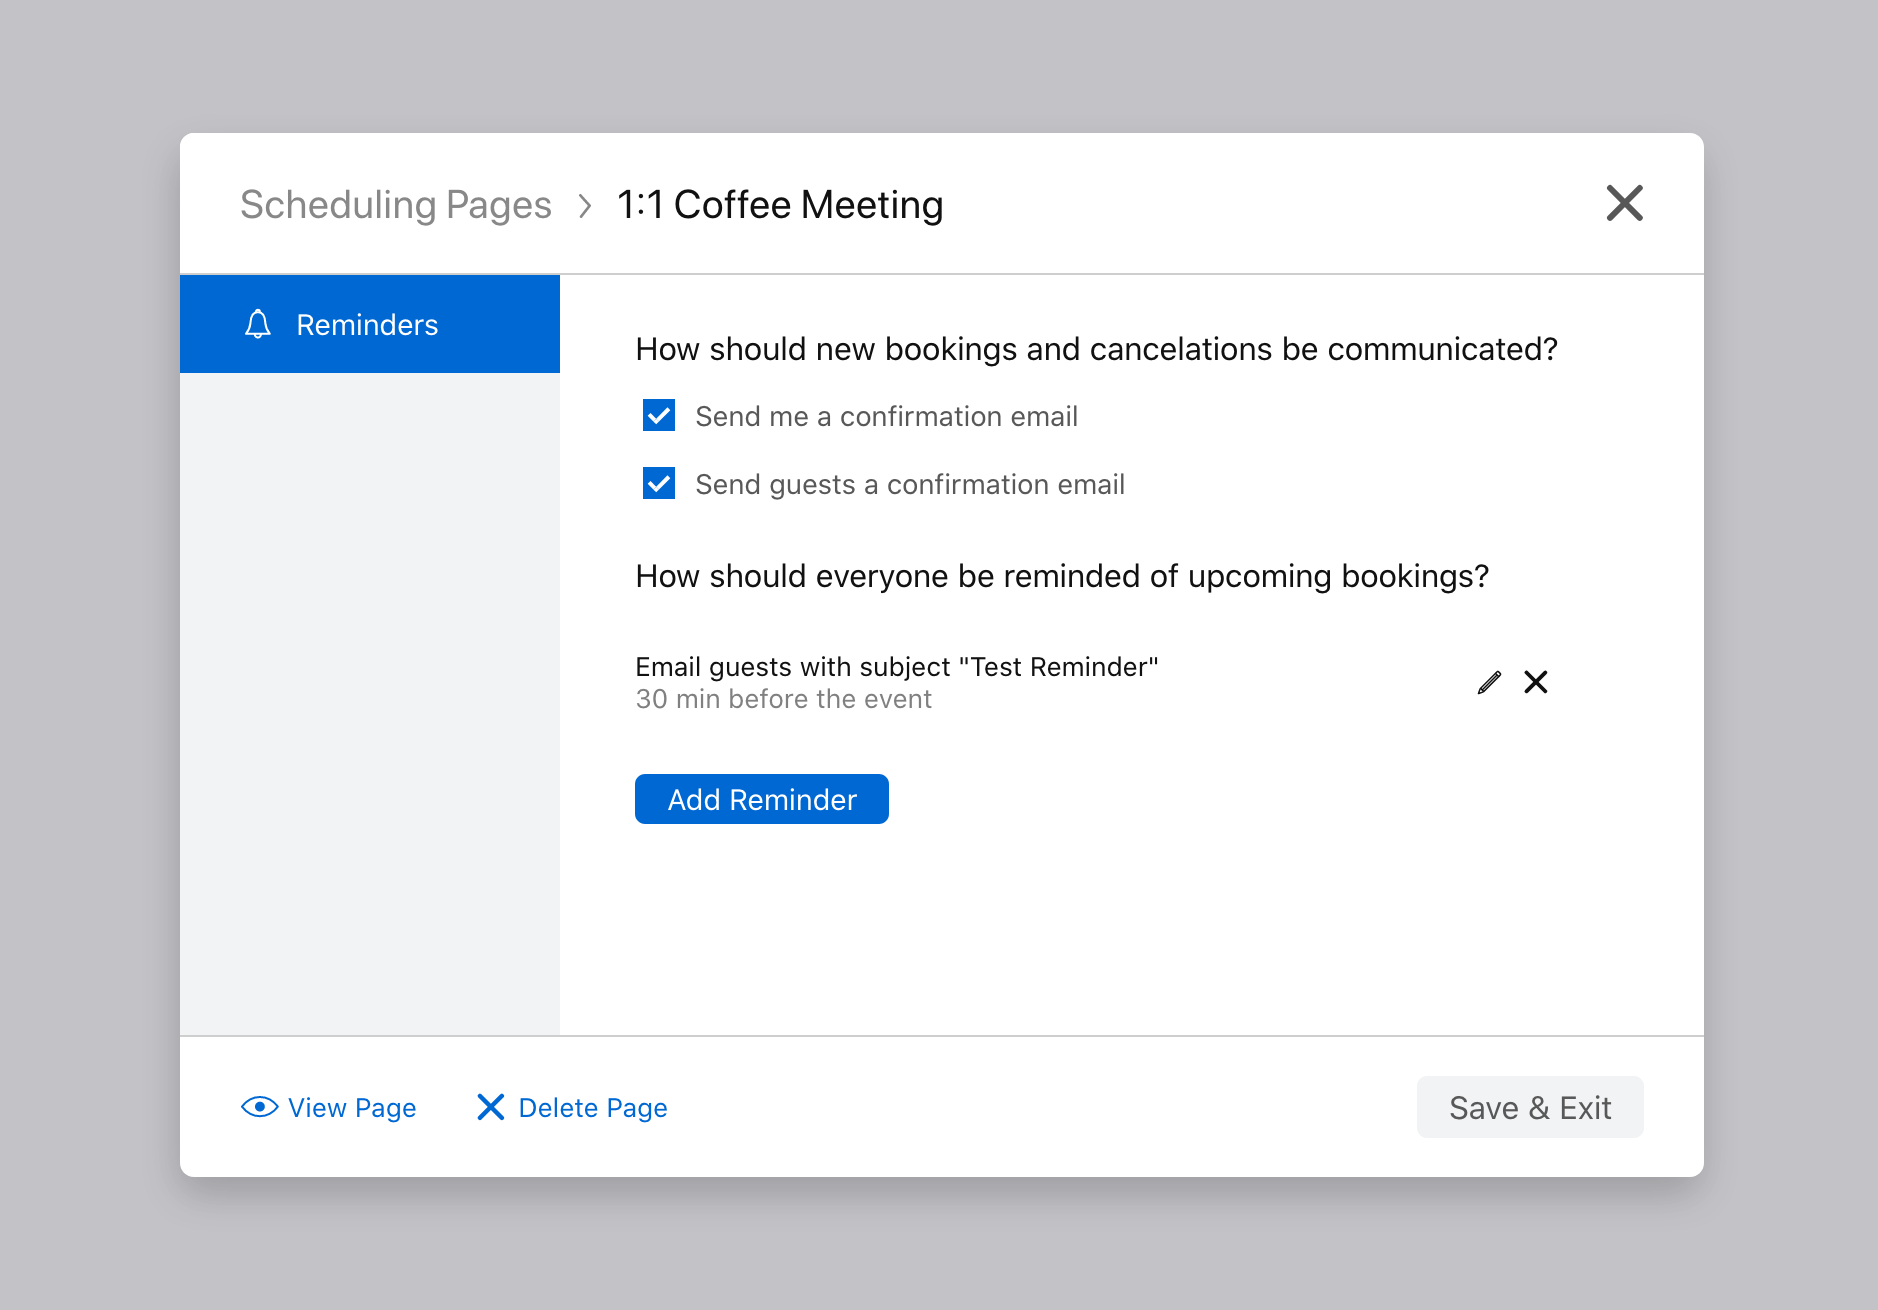 The Nylas Schedule Editor showing the "Reminders" settings for a one-on-one coffee chat. The "Send me a confirmation email" and "Send guests a confirmation email" options are selected.